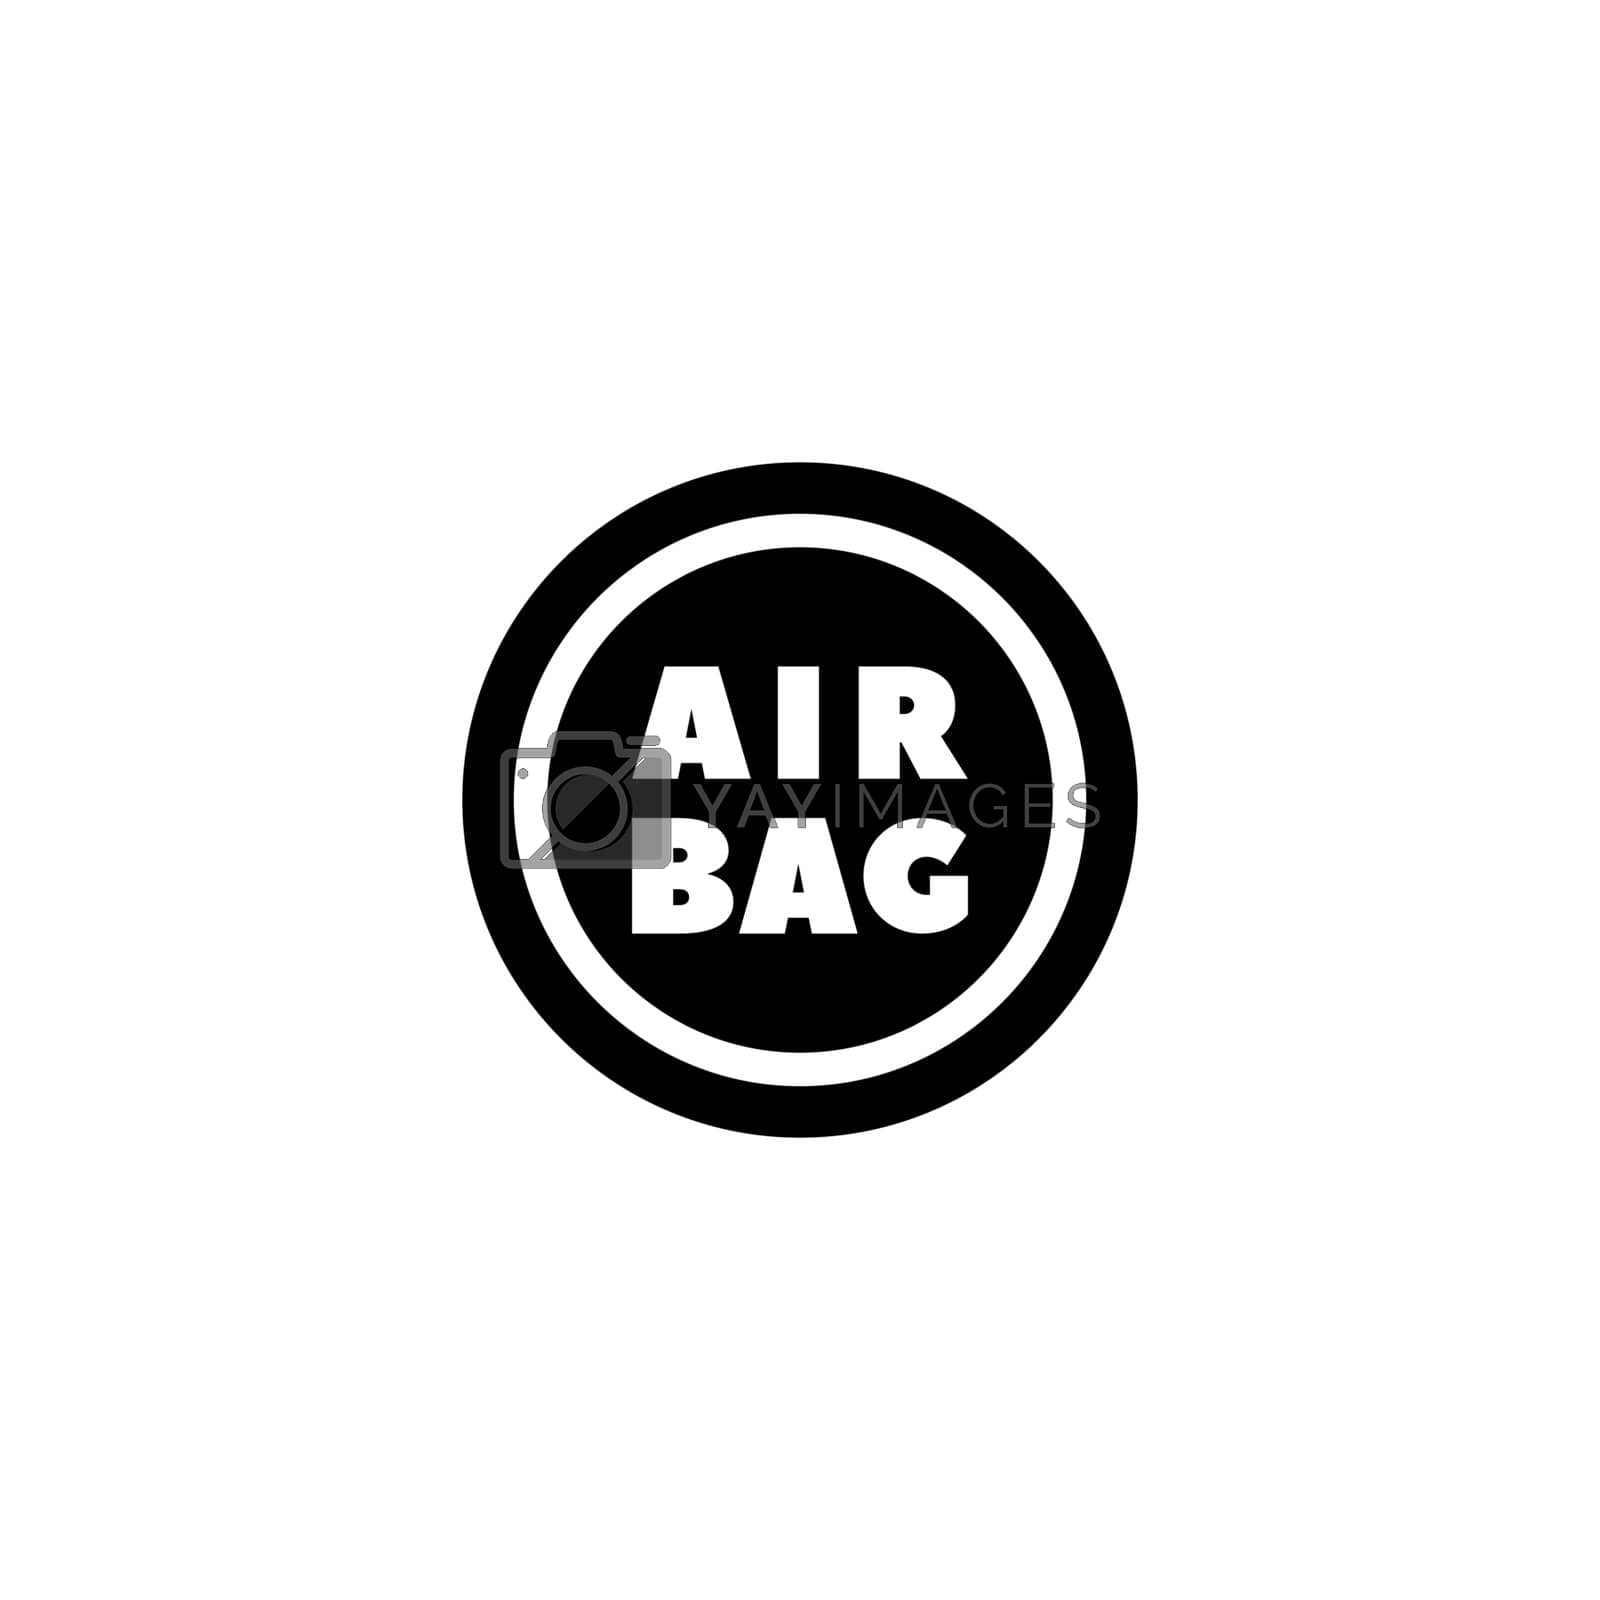 Royalty free image of Steering Airbag Flat Vector Icon by sfinks